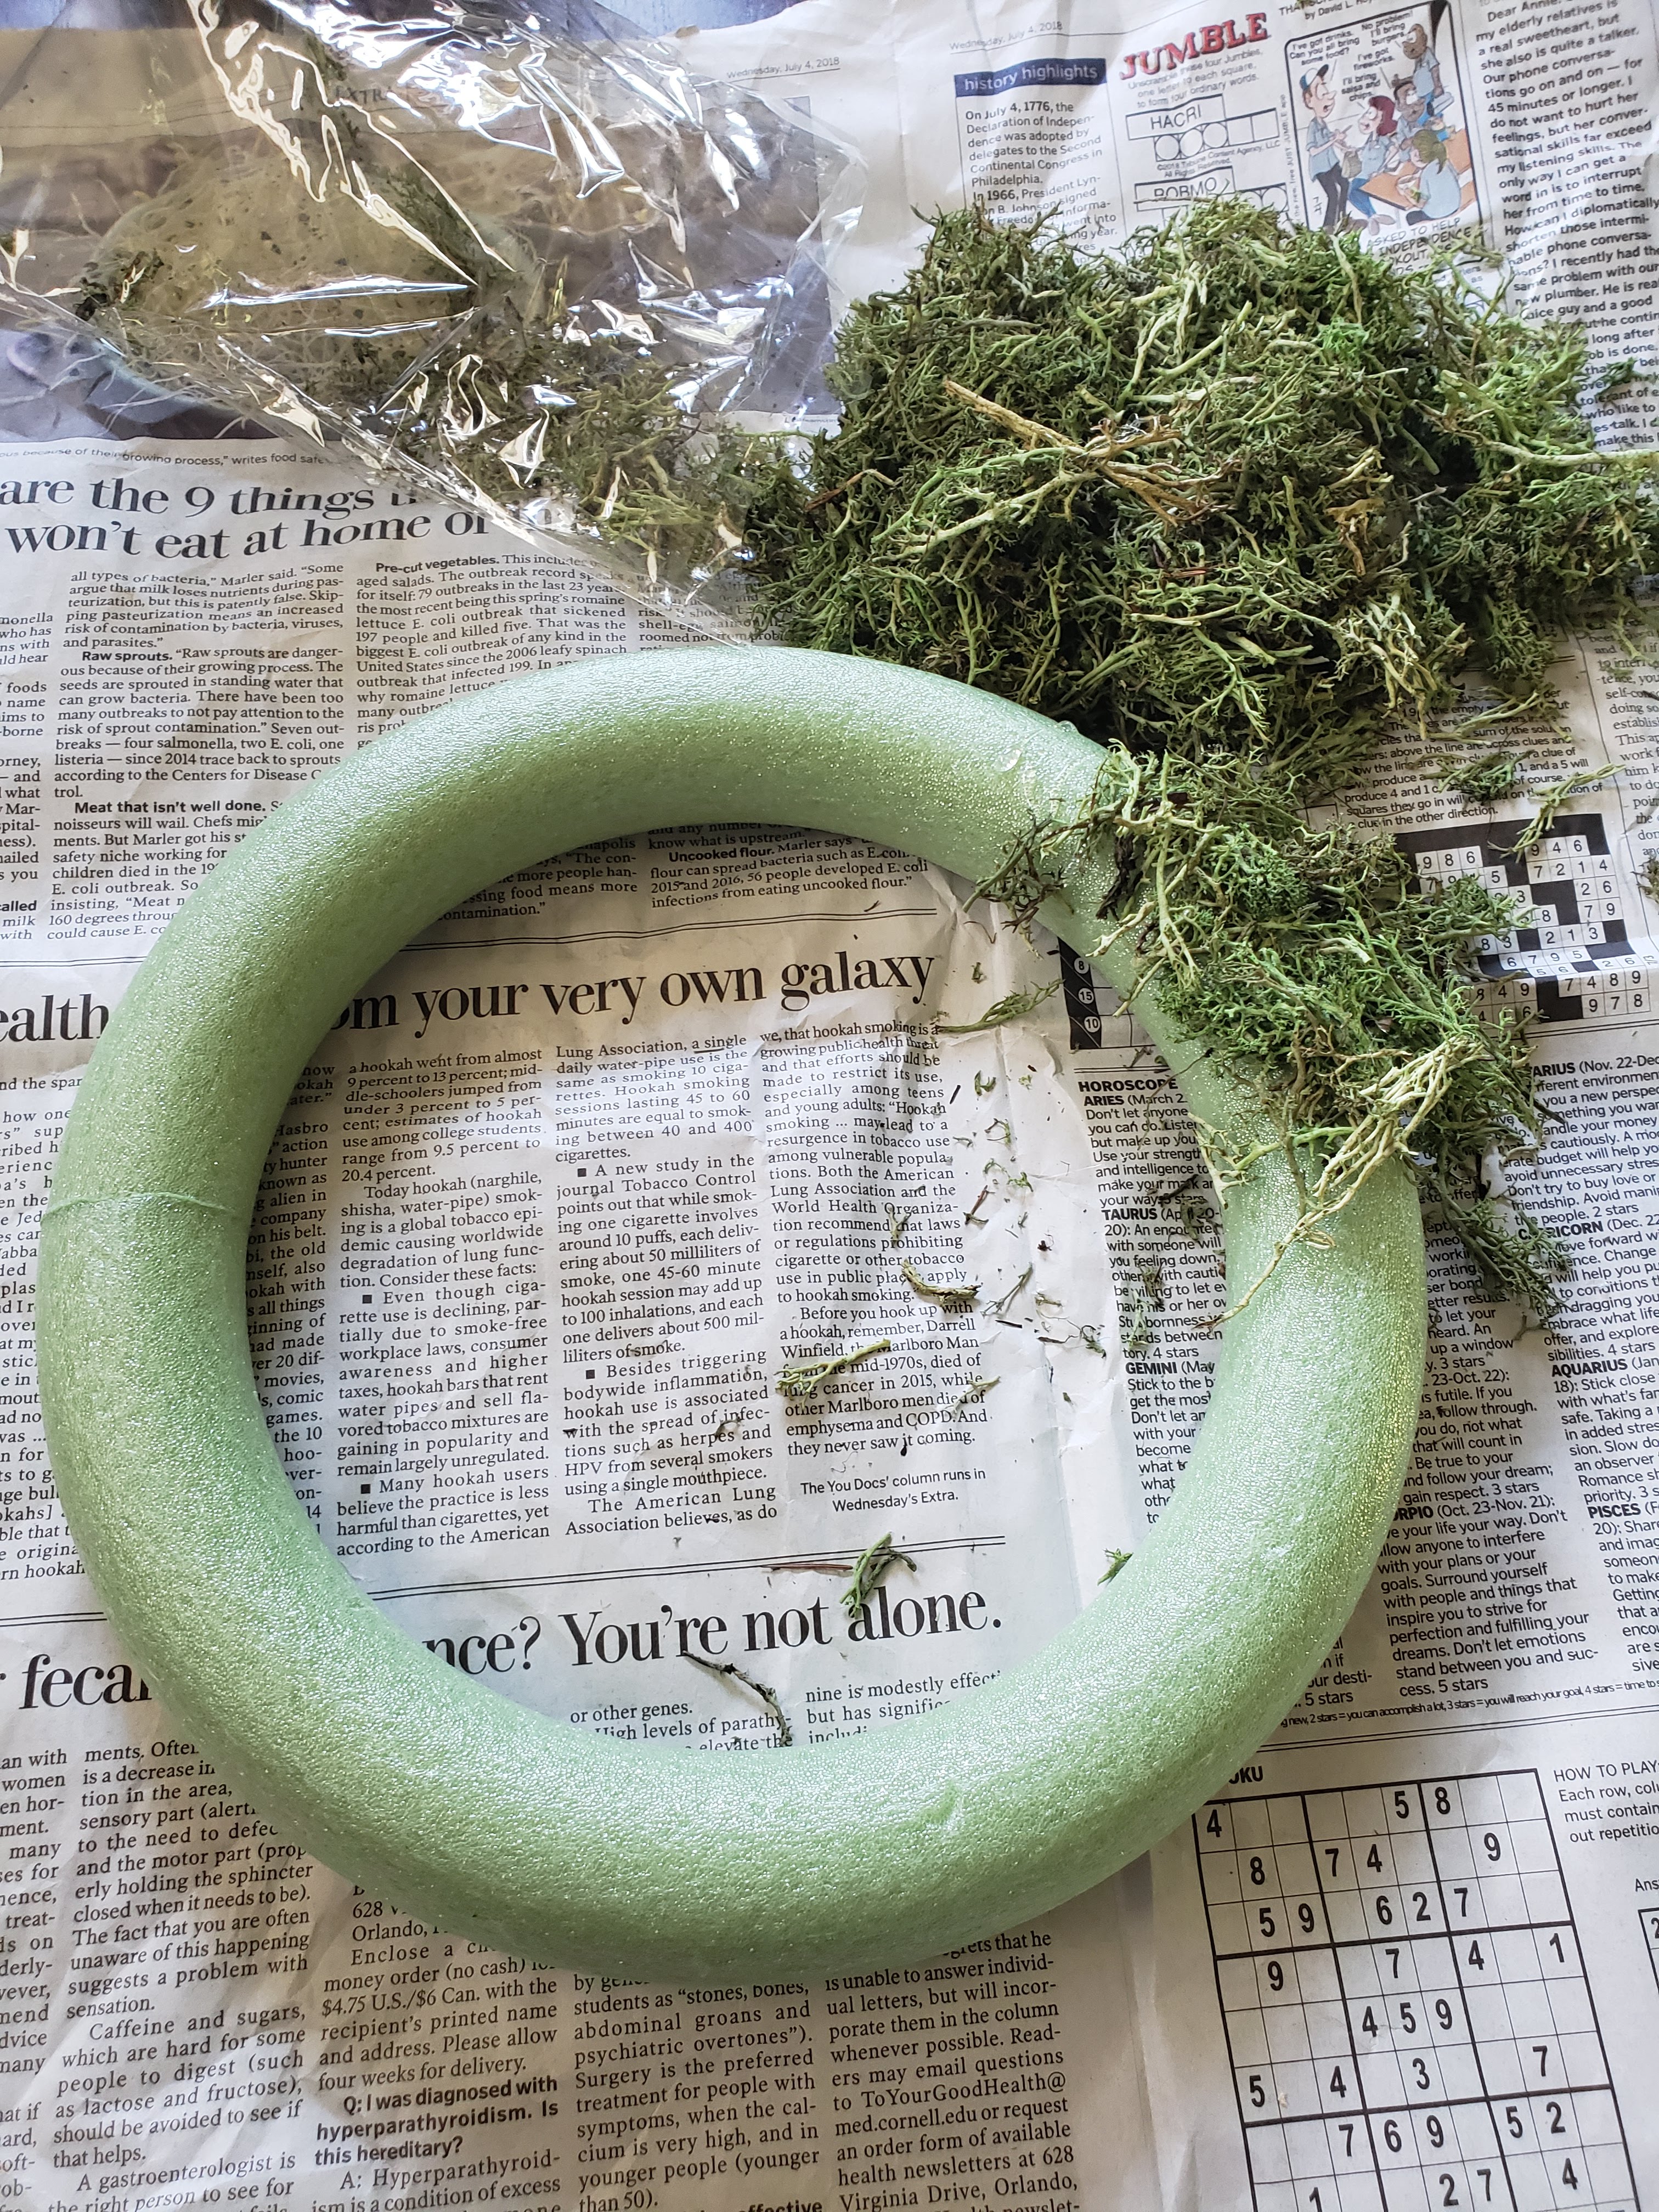 Glue the reindeer moss to the foam wreath form